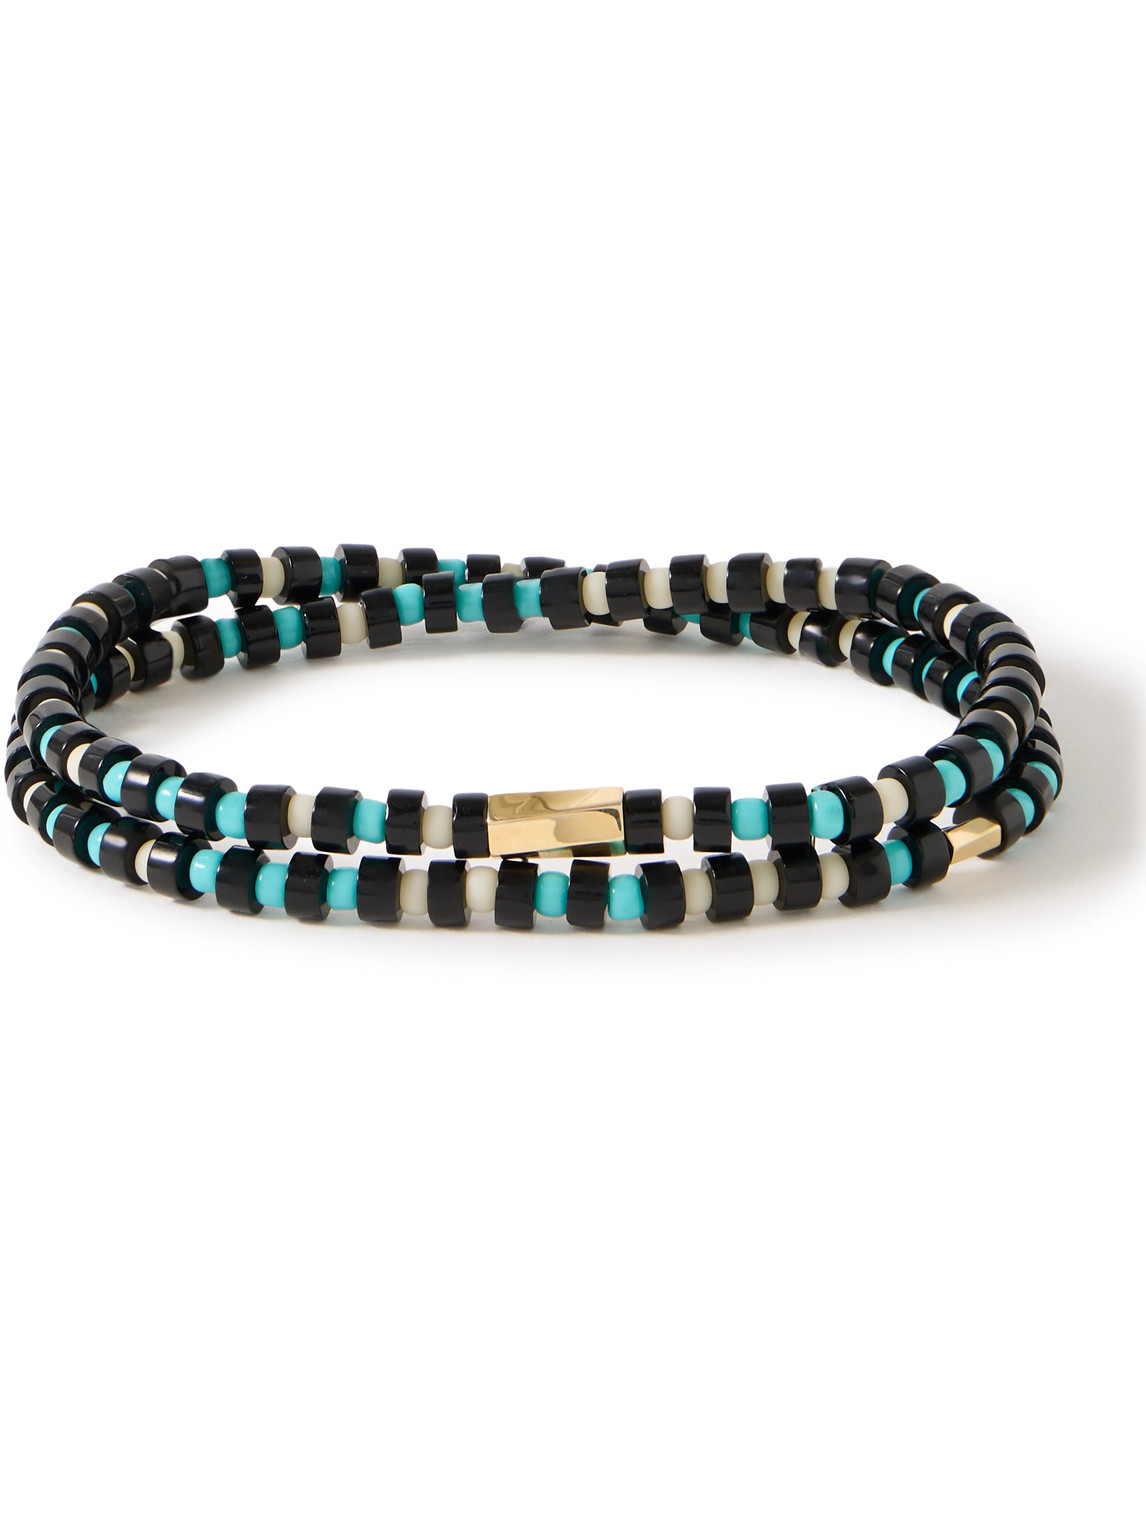 Luis Morais Gold, Onyx And Glass Beaded Wrap Bracelet In Blue